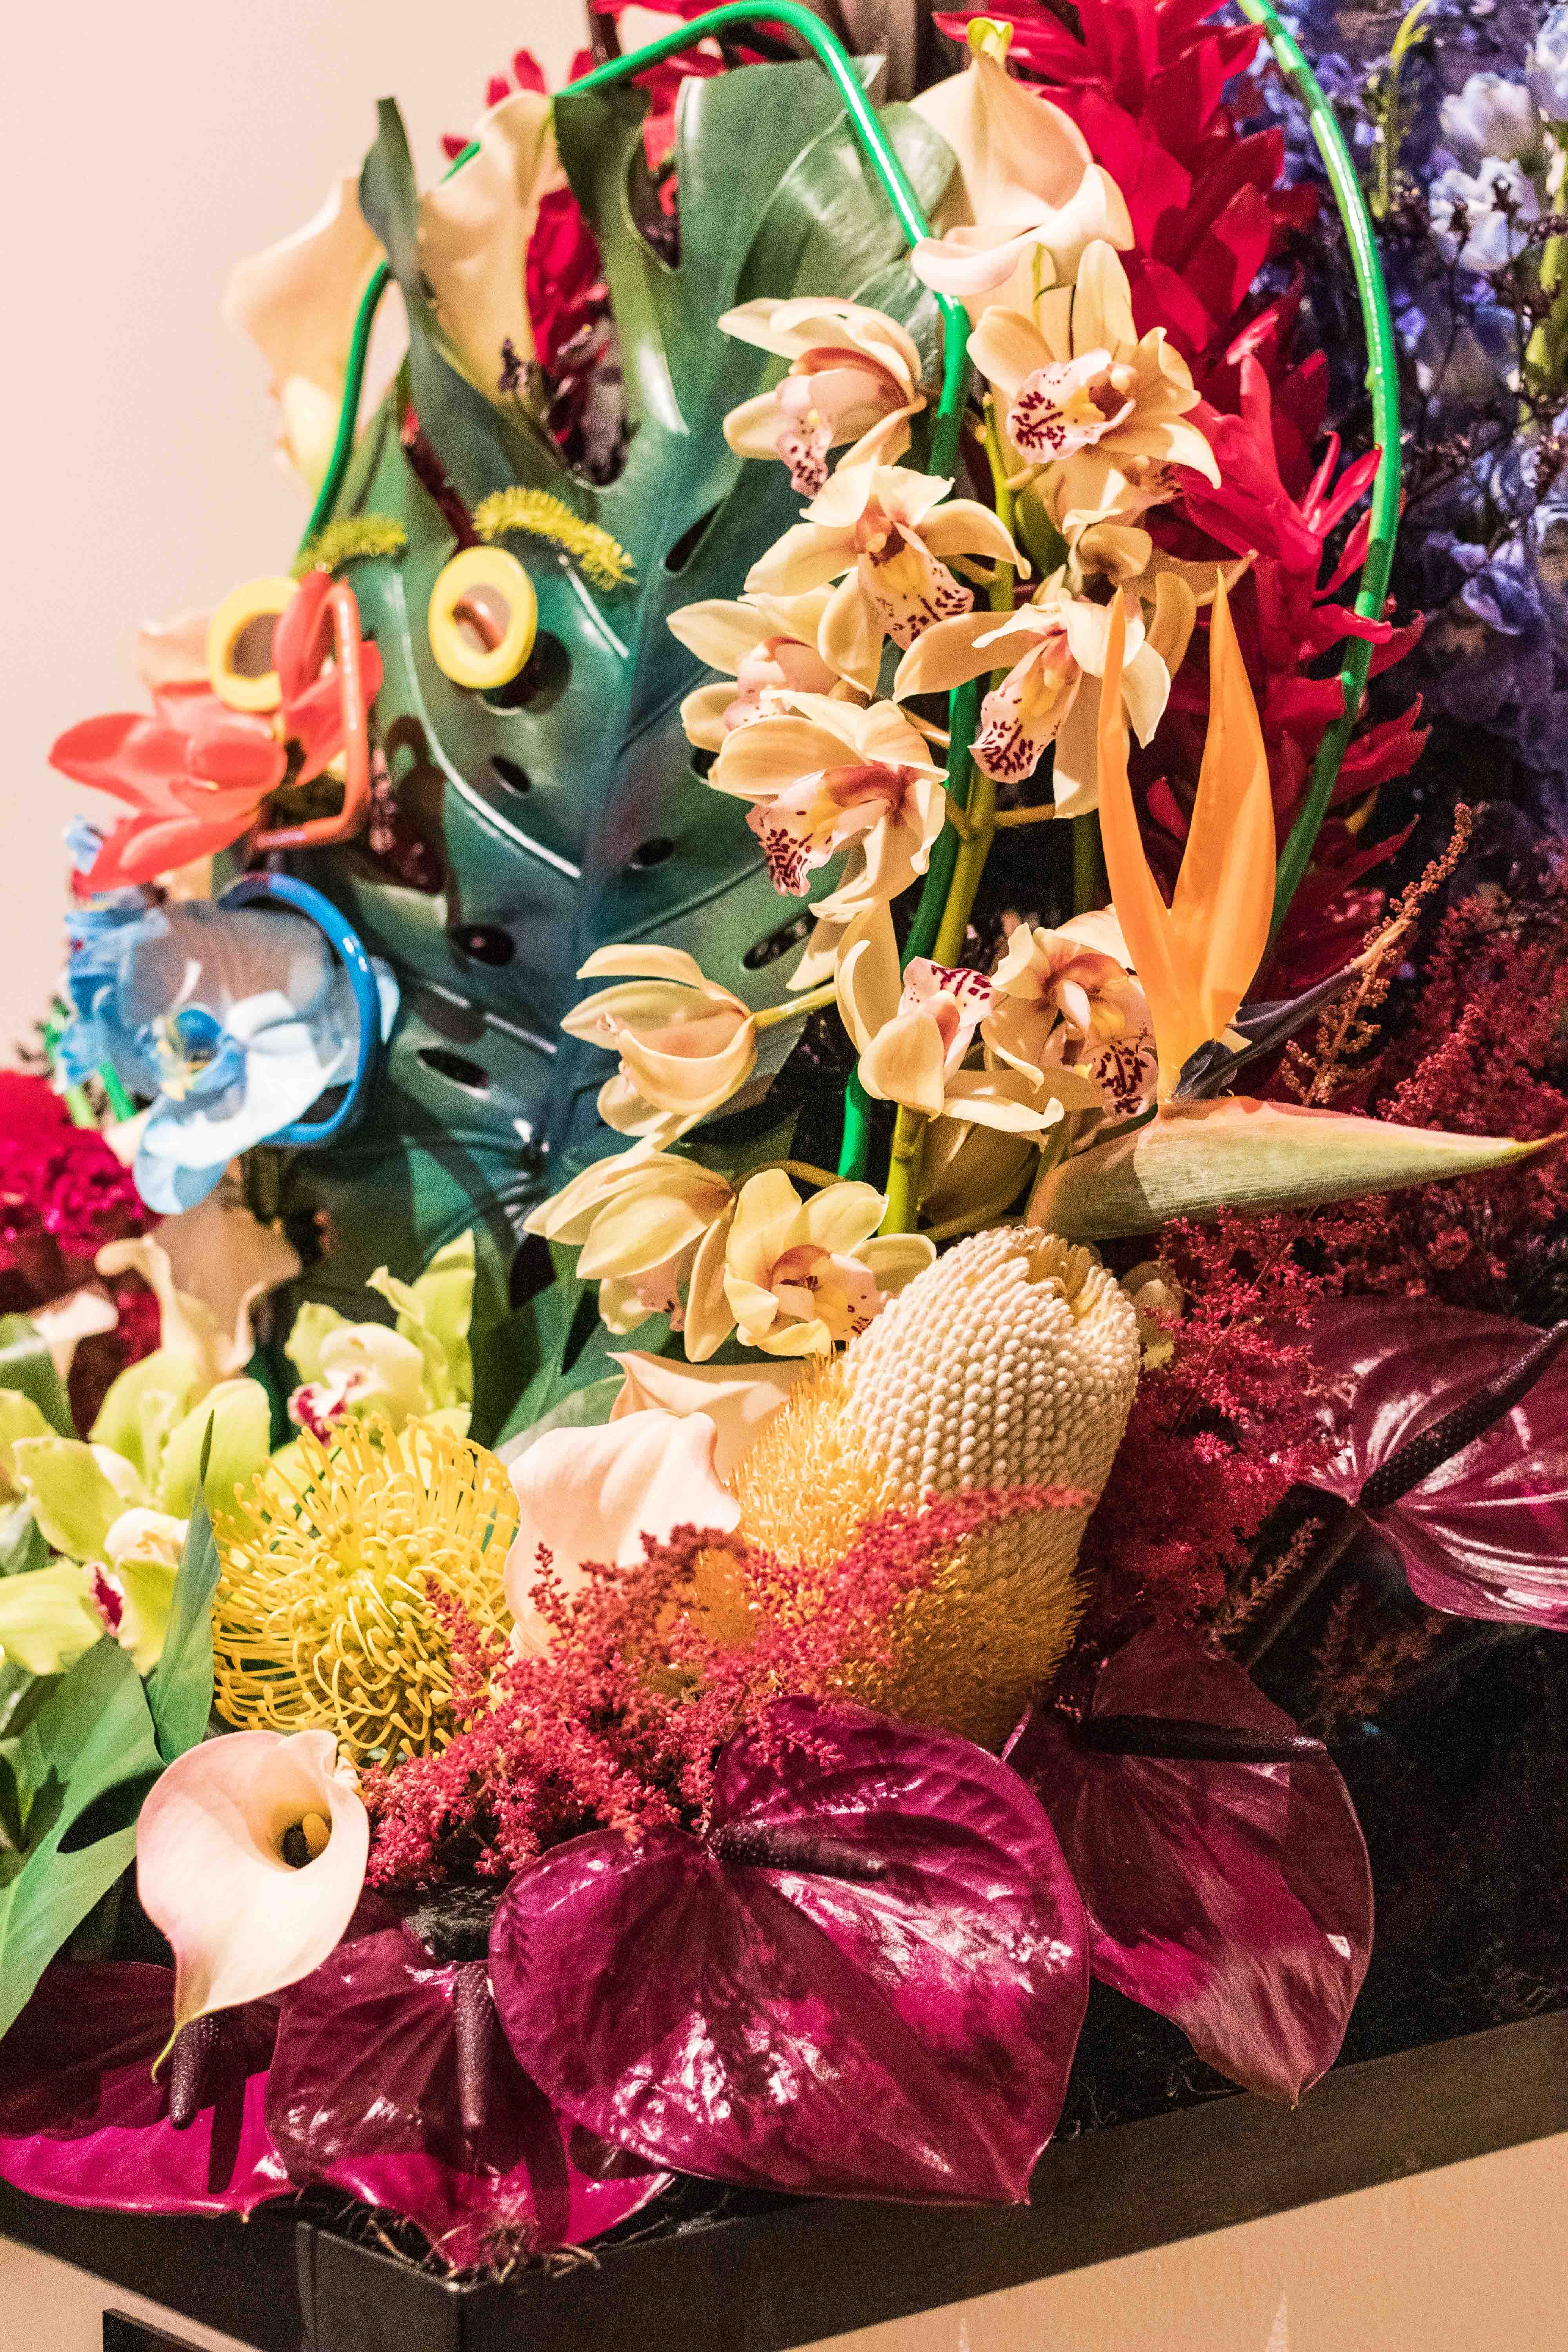 Art in Bloom 2019 at the Milwaukee Art Museum, Milwaukee, WI #ArtinBloom #floralshow #MilwaukeeArtMuseum | https://www.roseclearfield.com